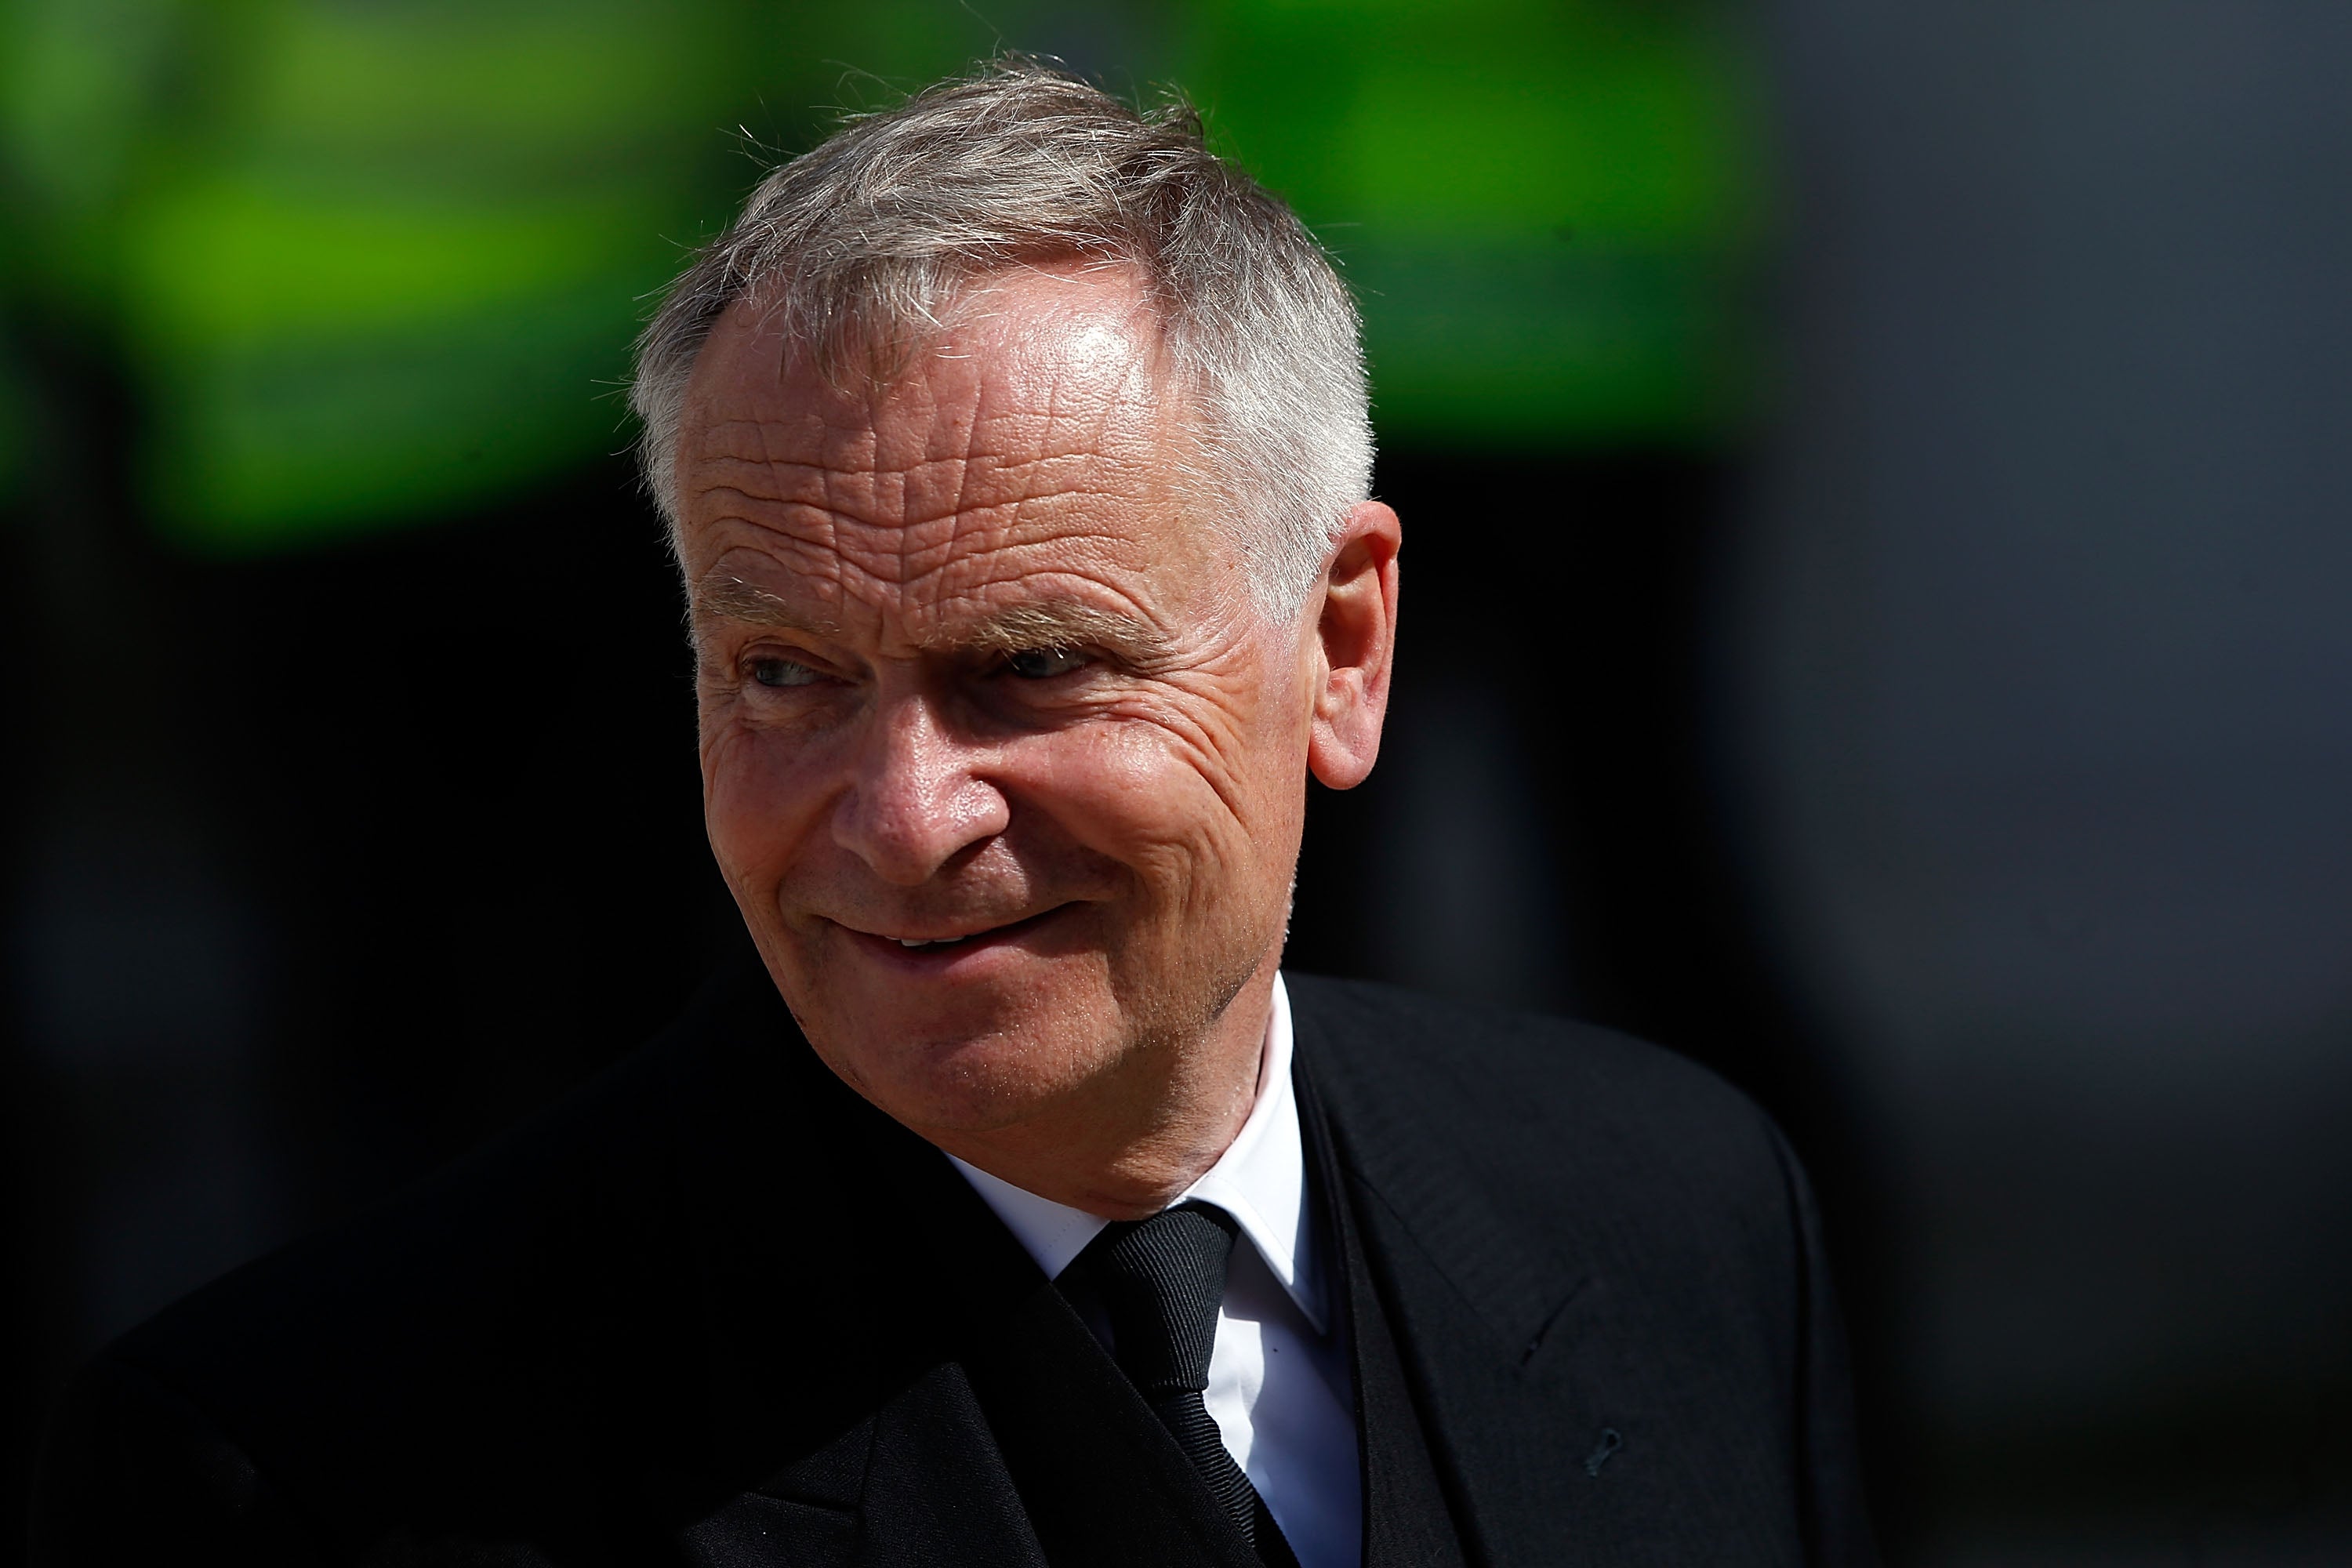 Jeffrey Archer also criticised calls for a referendum on the final Brexit deal